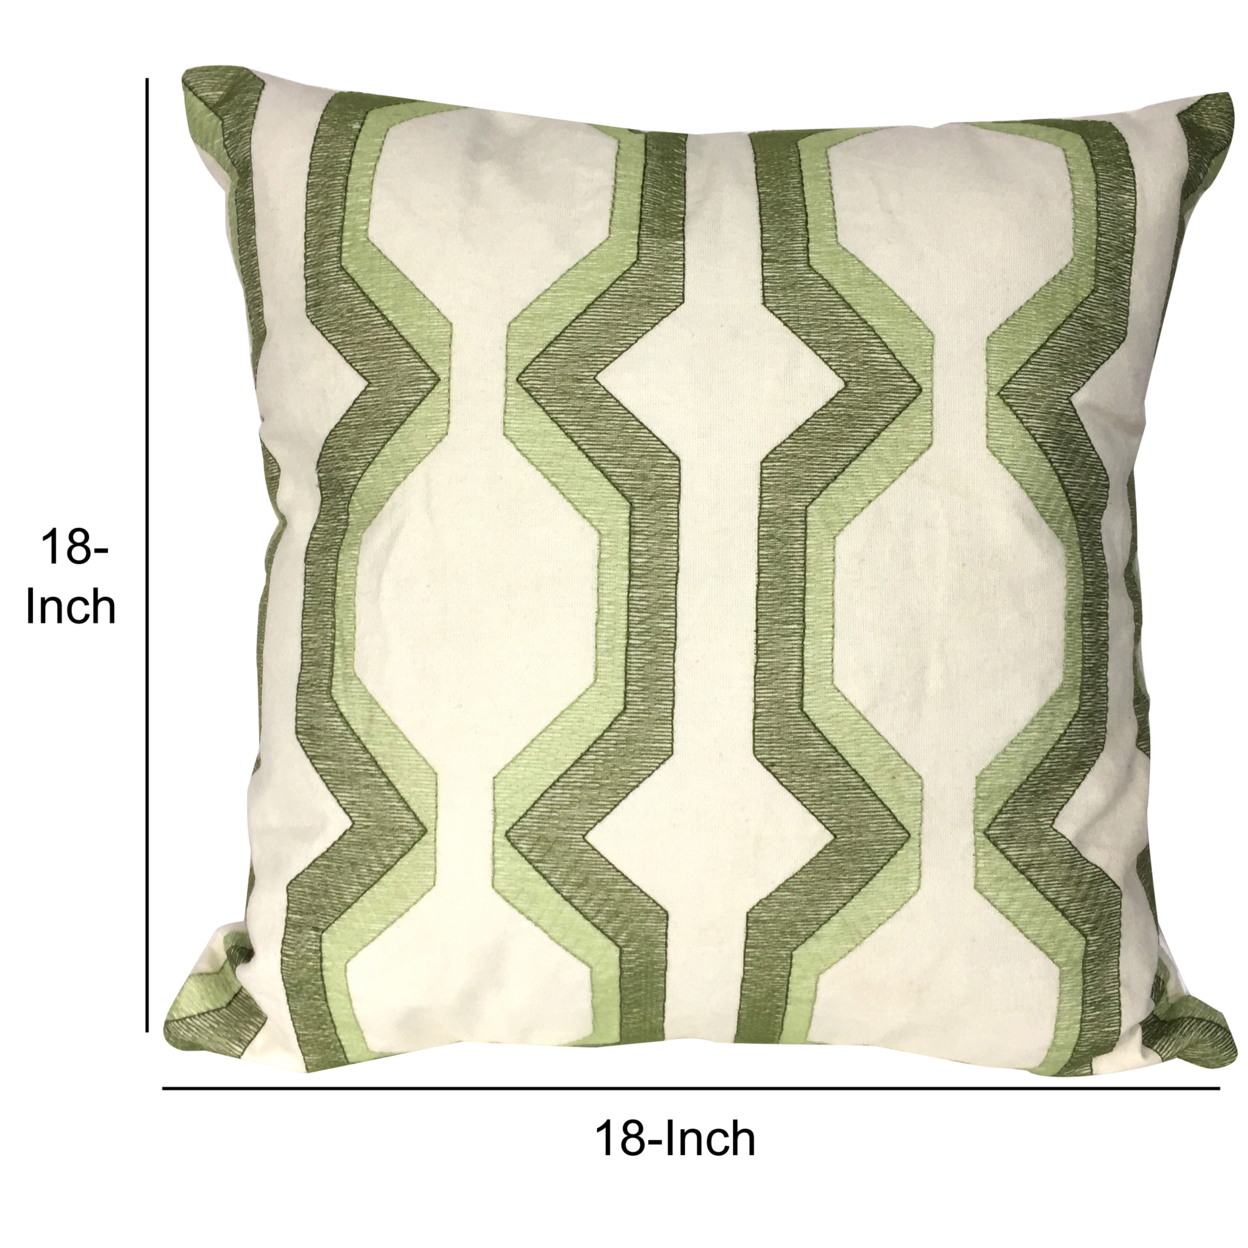 Contemporary Cotton Pillow With Geometric Embroidery, Green And White- Saltoro Sherpi